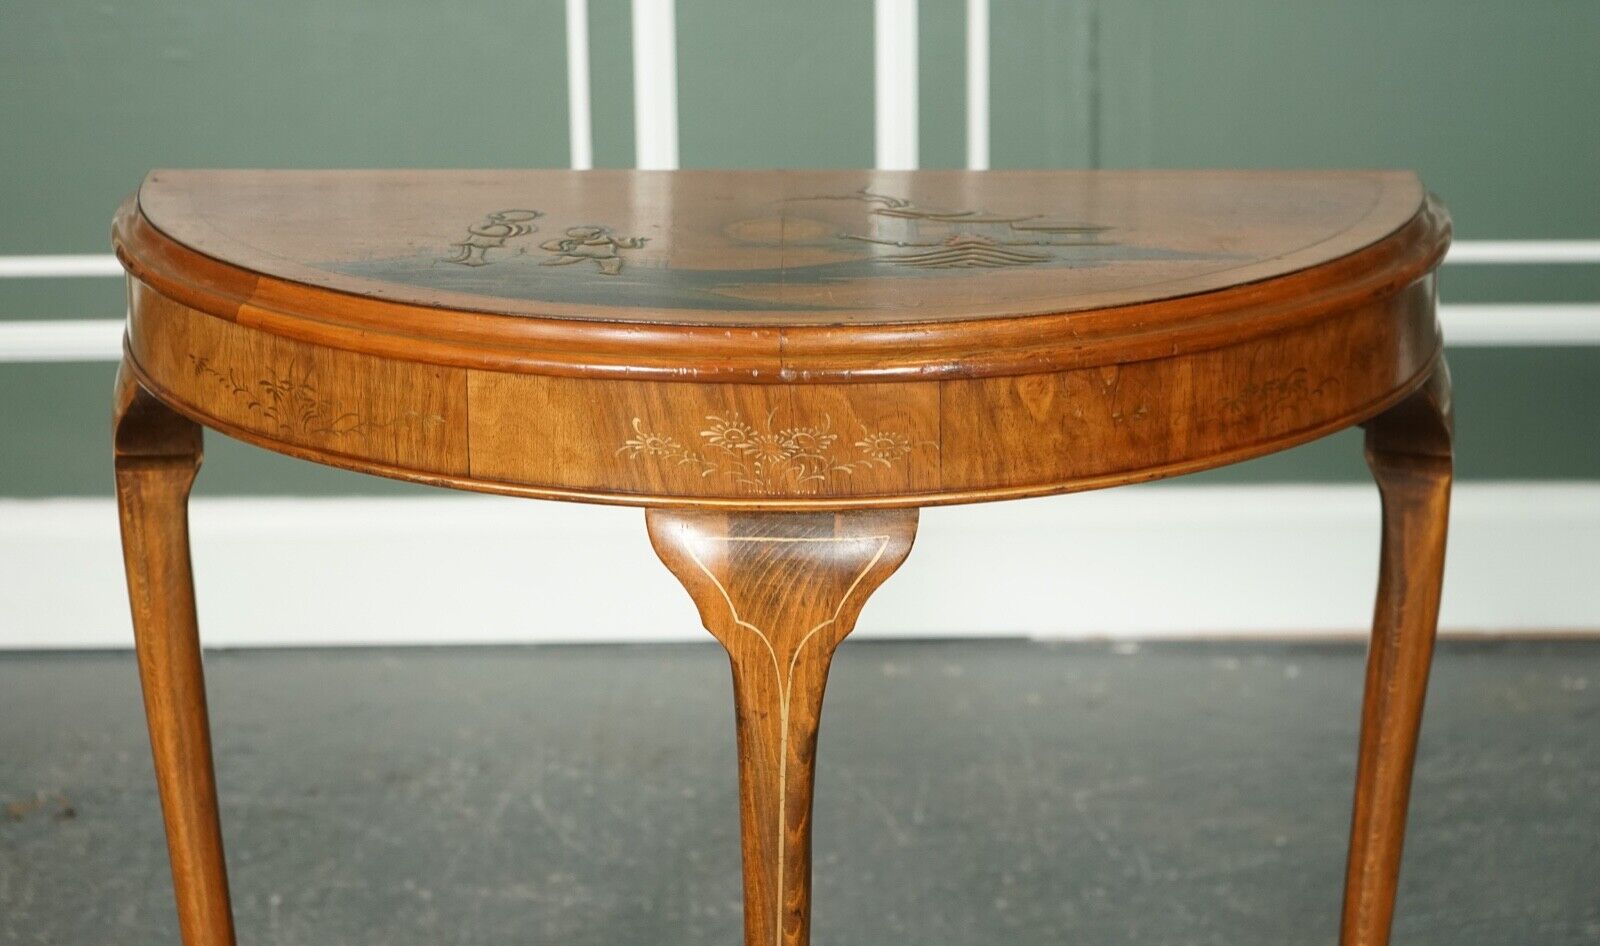 VINTAGE ORIENTAL HALF MOON DEMI LUNE TABLE MADE BY NORTHAMPTON CABINET COMPANY